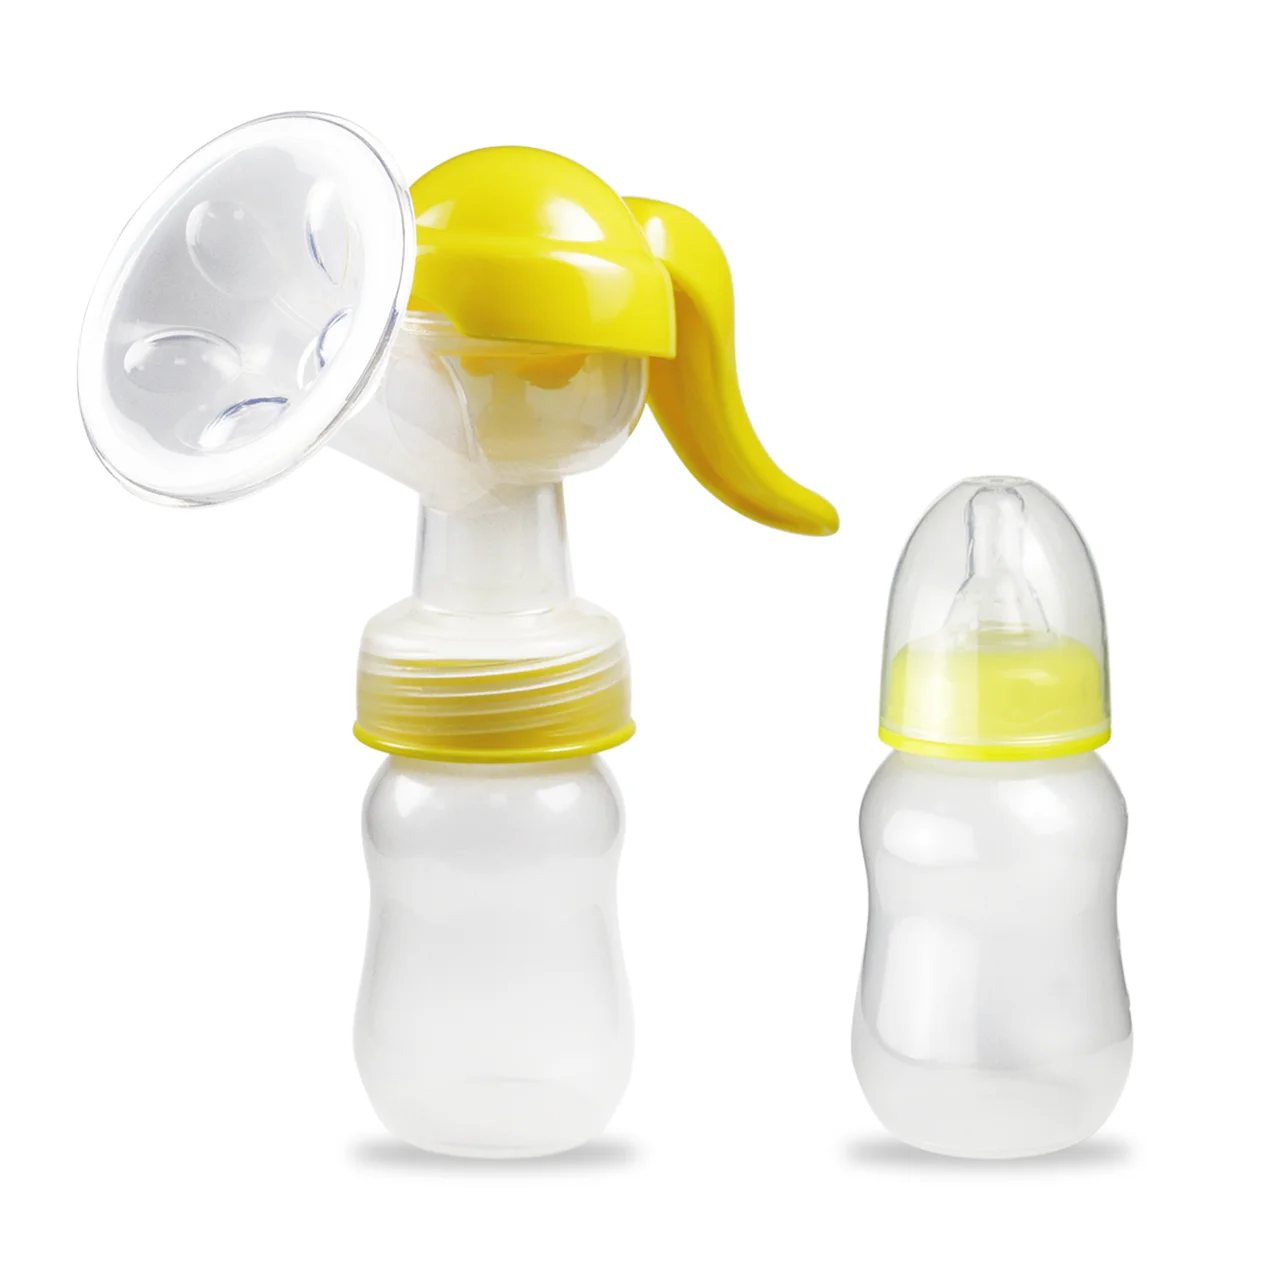 BPA Free Silicone Hand Care Manual Breast Pump For Mother and Baby